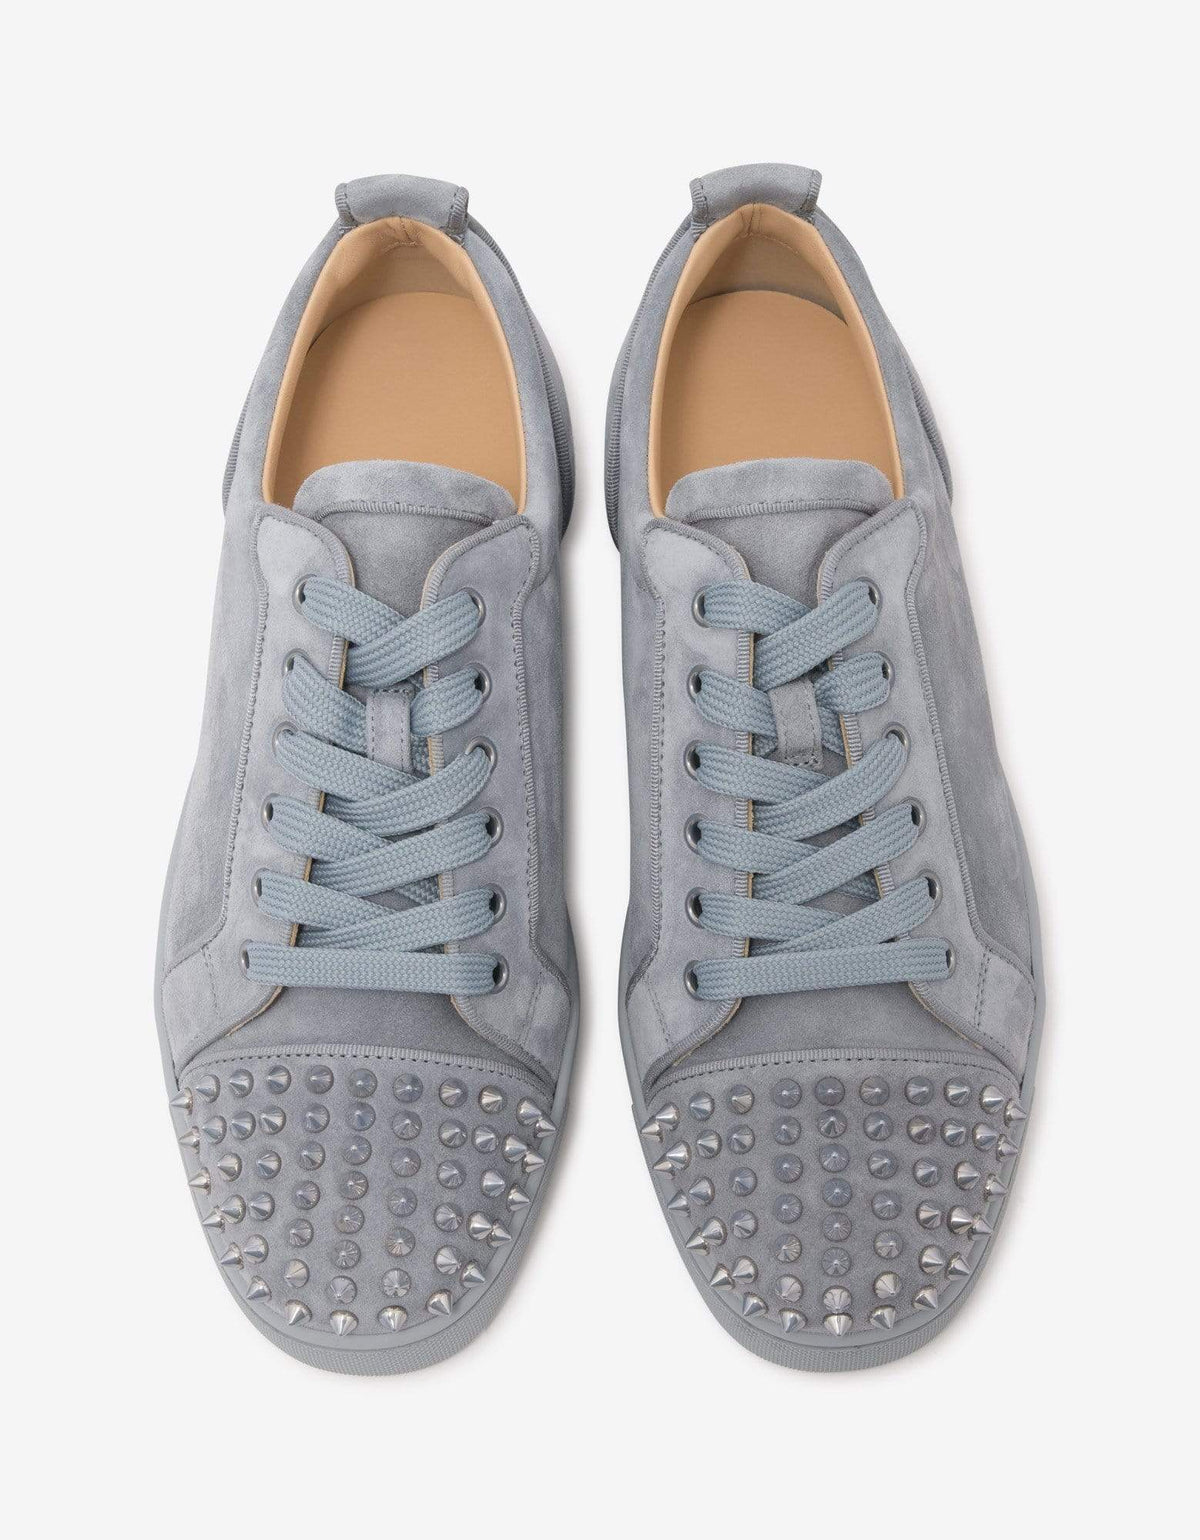 Christian Louboutin Louis Junior Spikes Orlato Grey Suede Trainers -